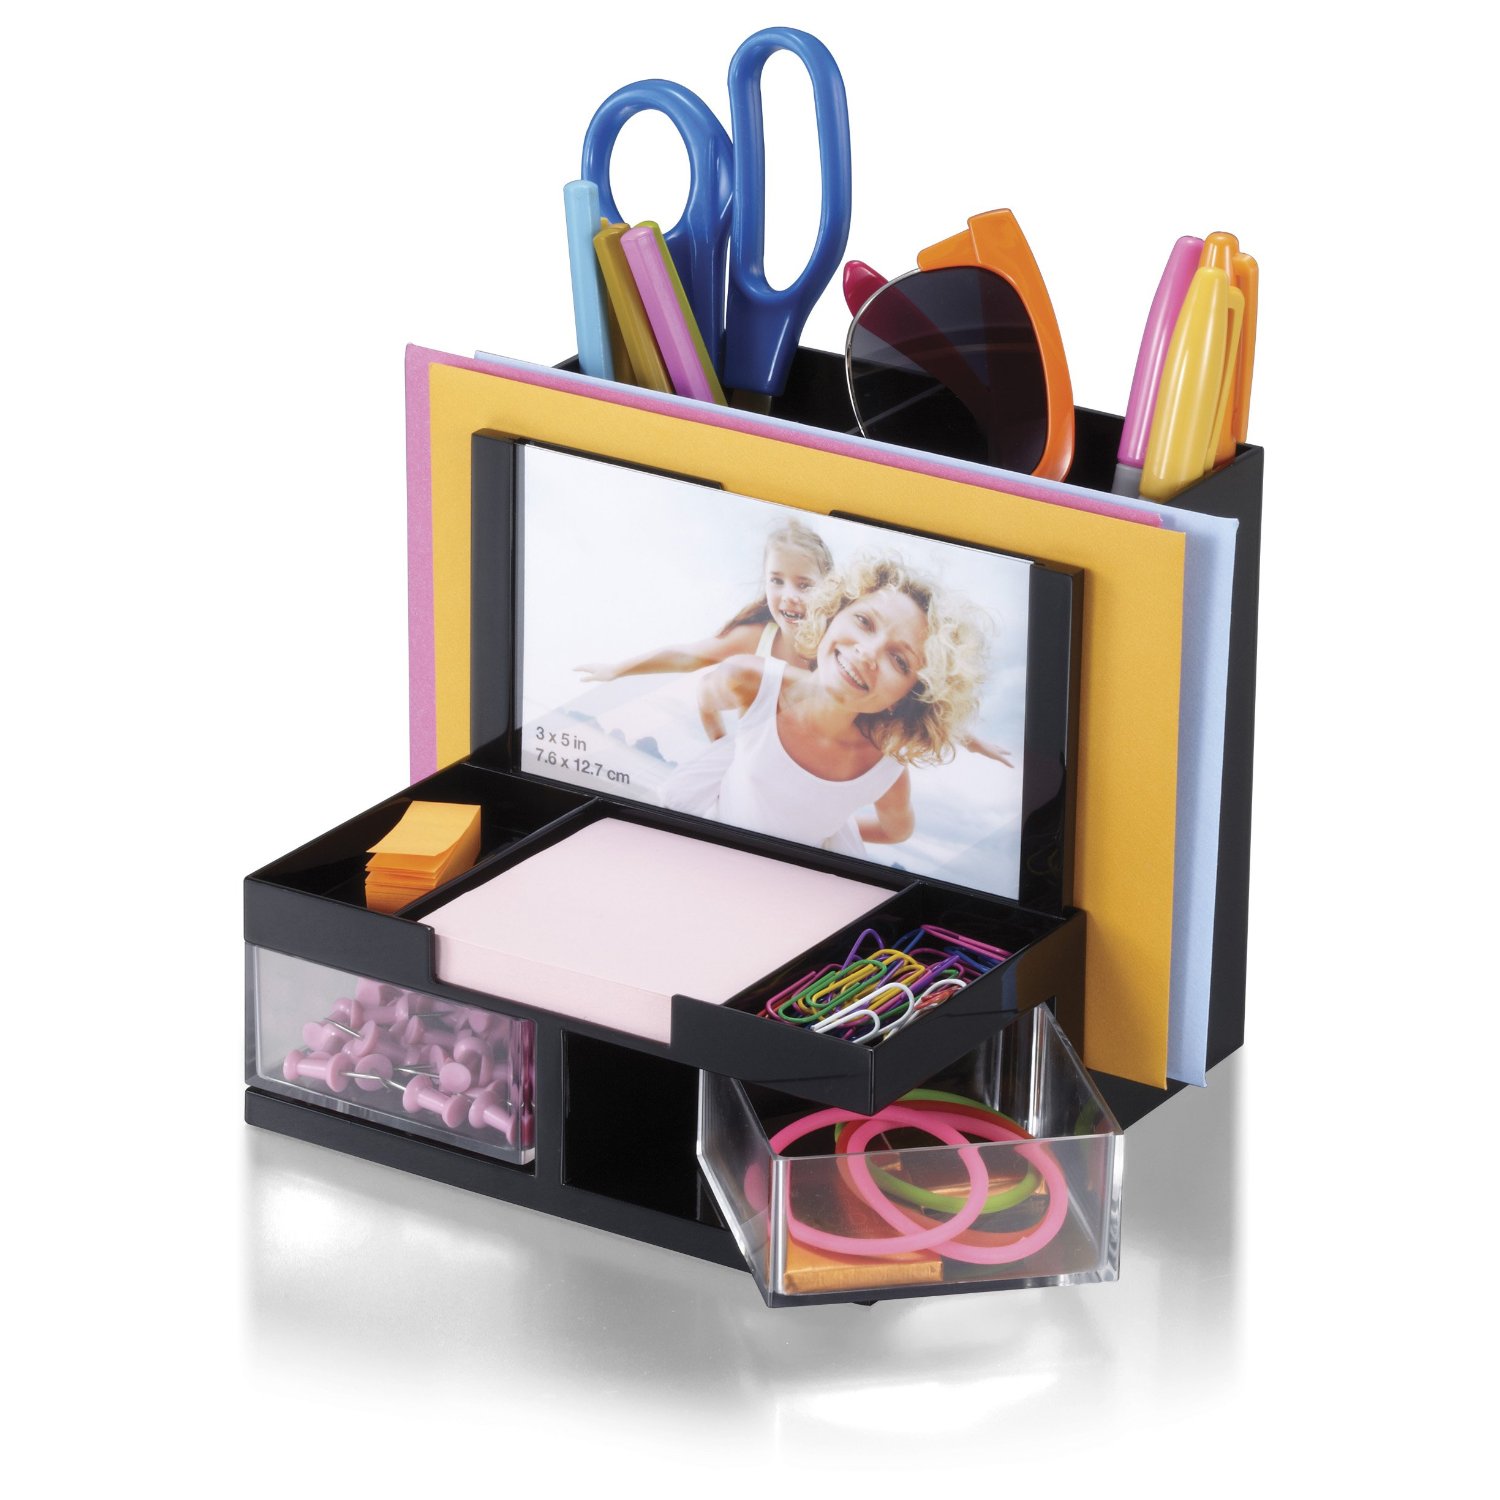 Two swing-out compartments for clips or small objects plus additional compartments for sticky notes and clips.